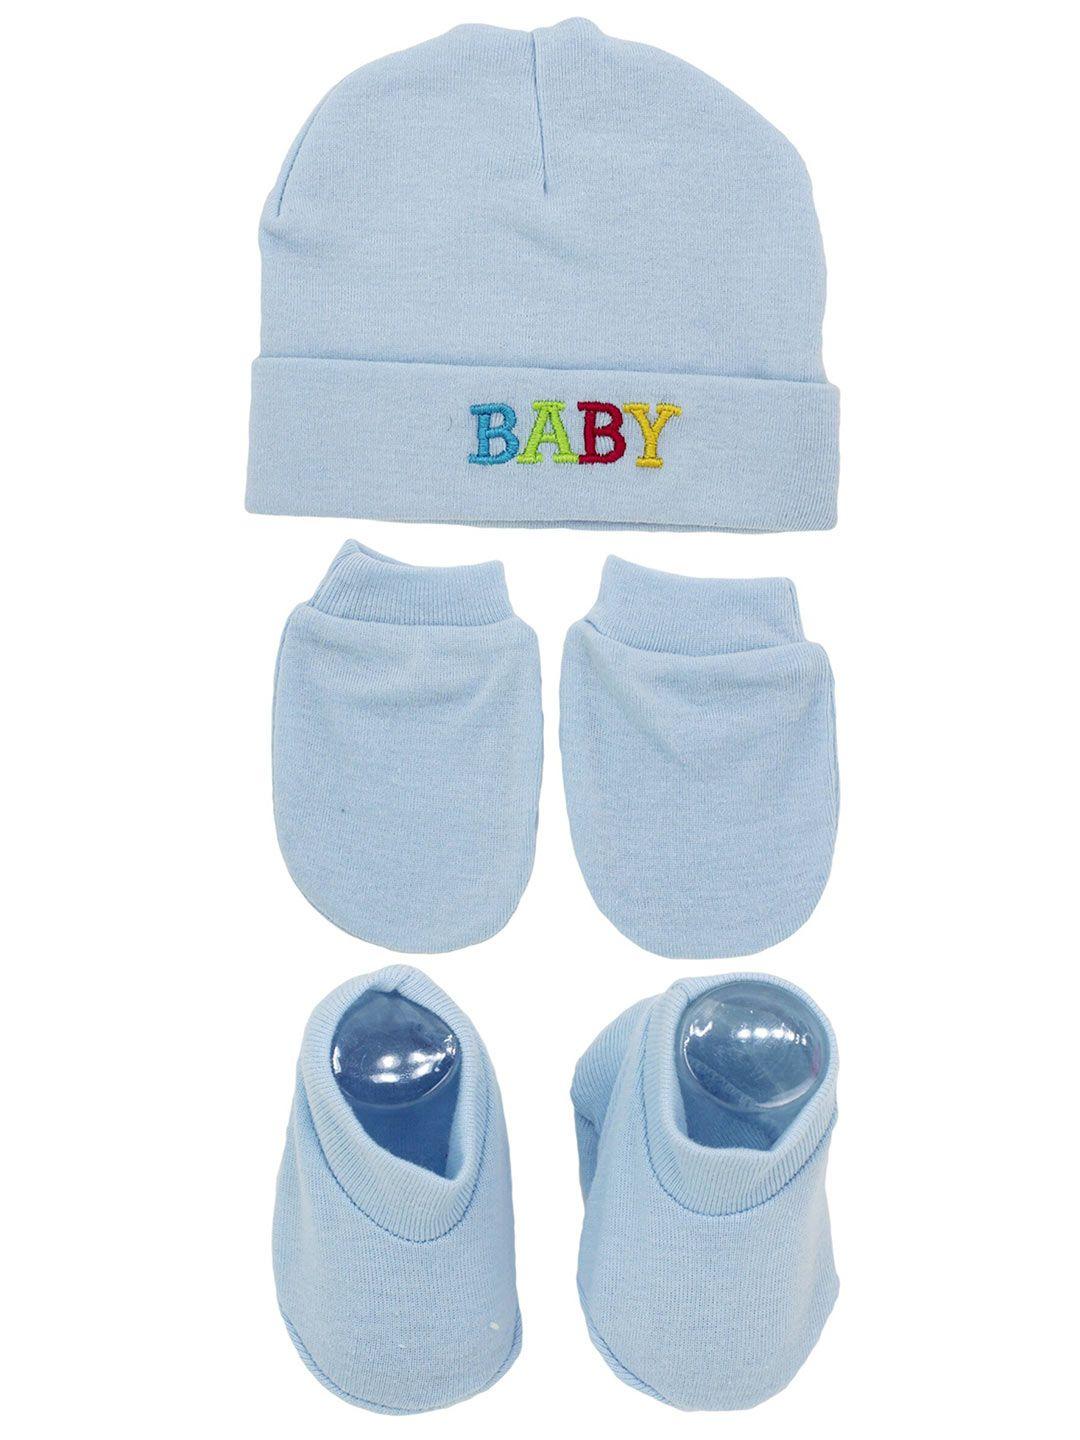 baesd infants organic cotton mittens with booties & cap